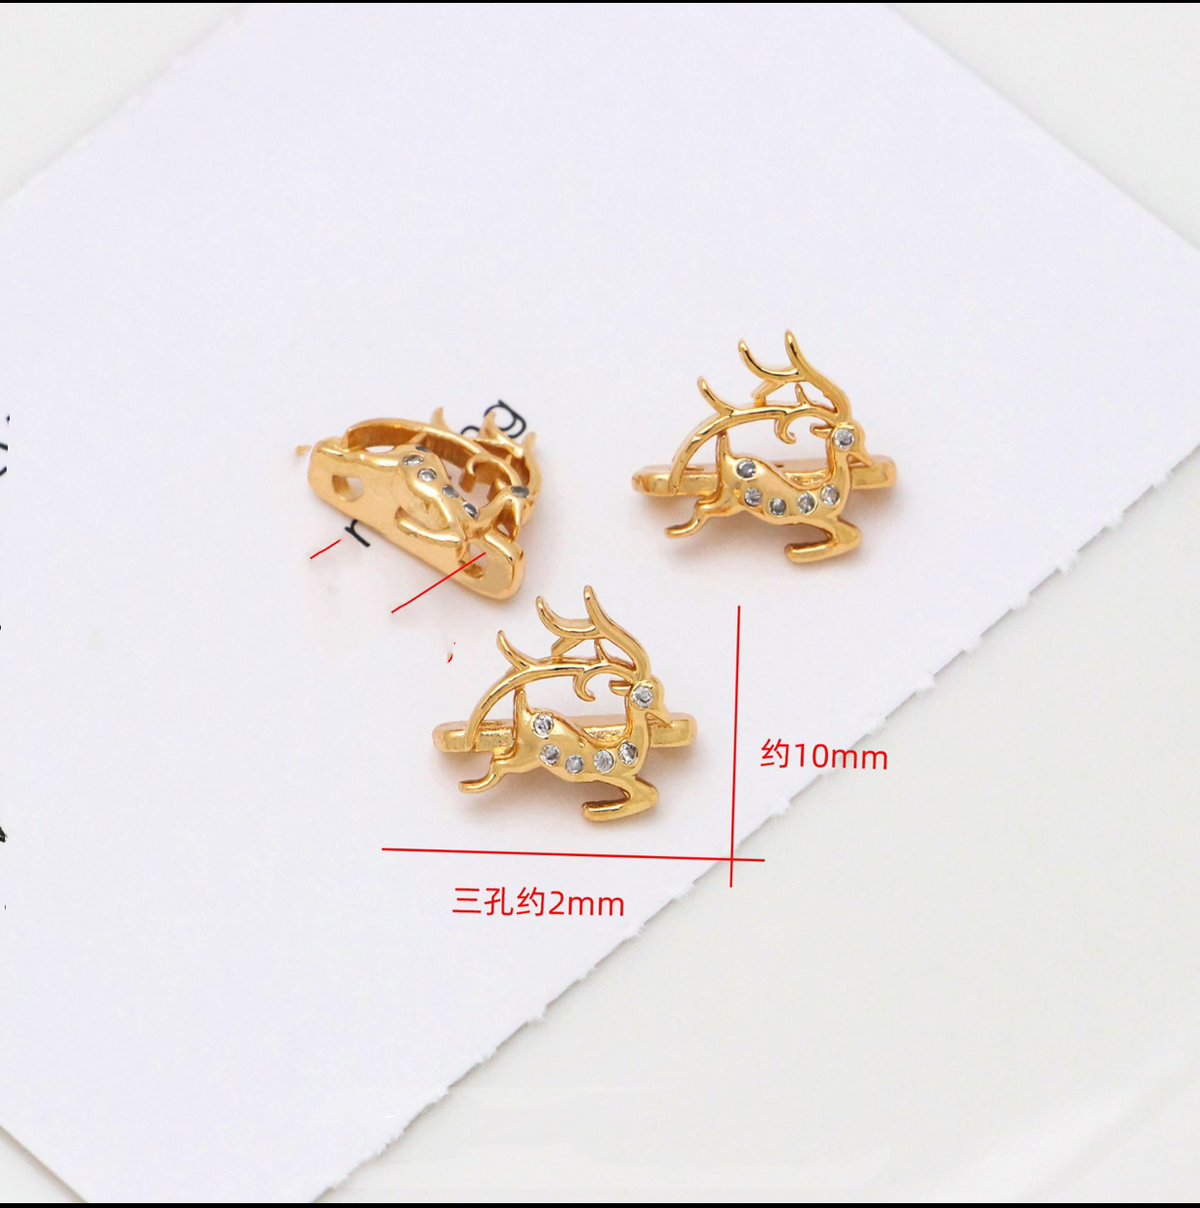 # T9 T10 Three Holes Spacers Charms For DIY Jewelry Accessories